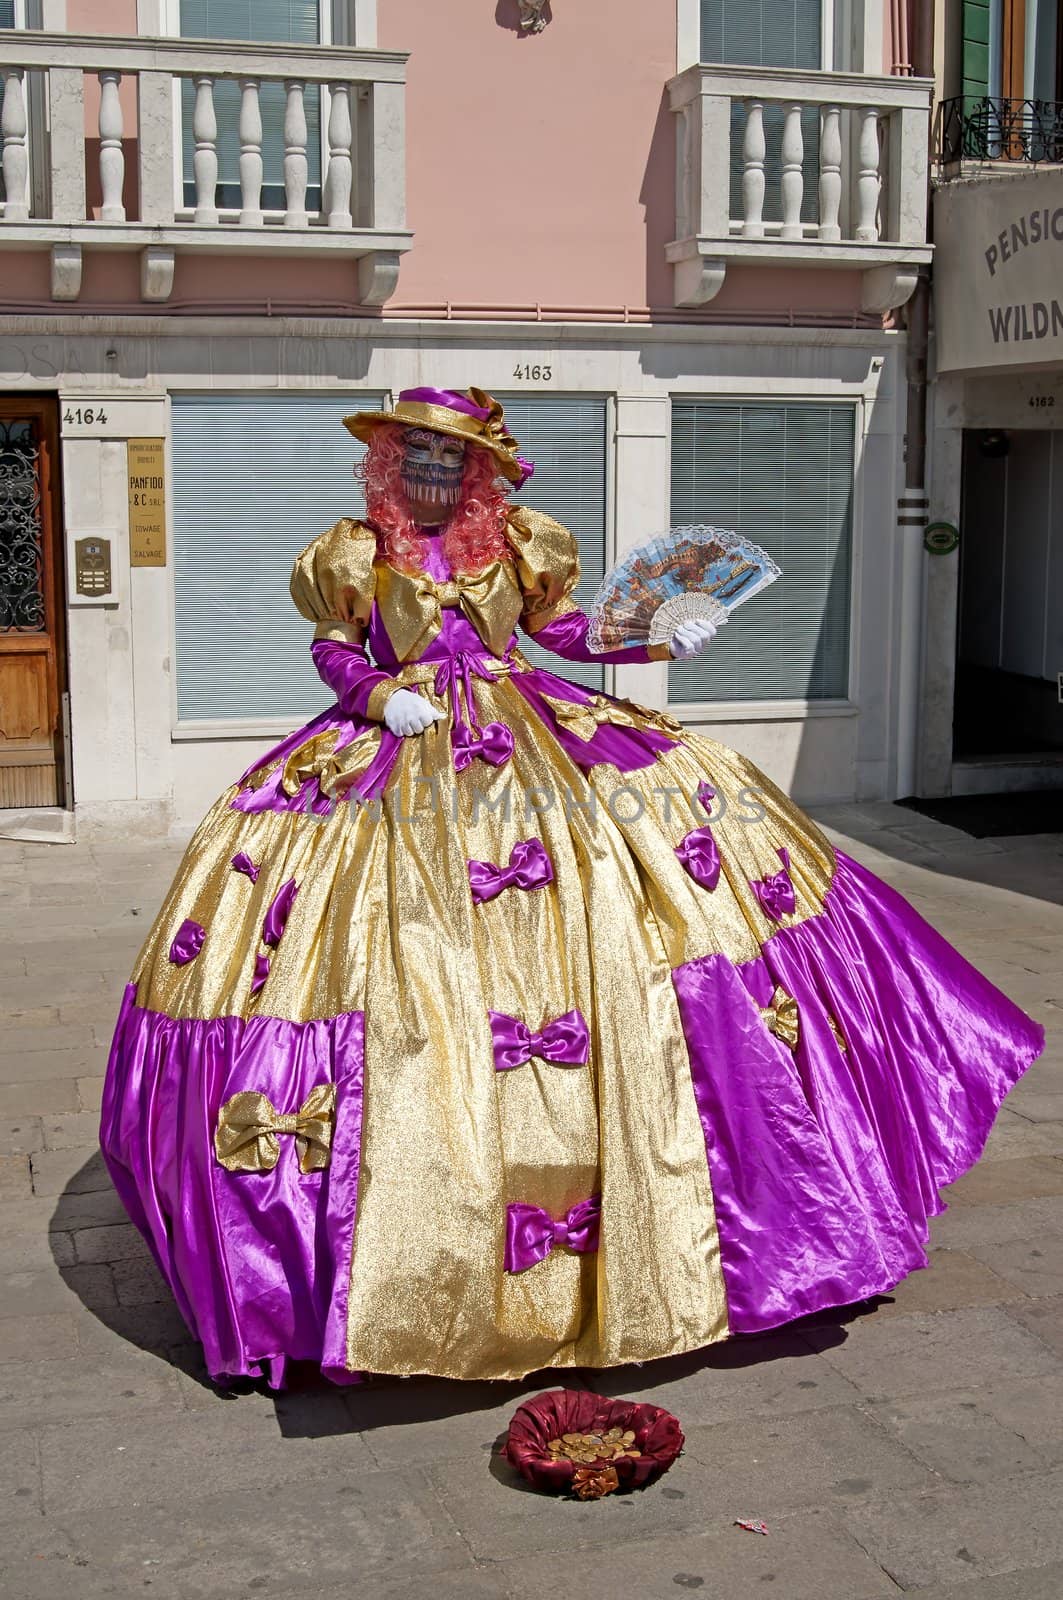 VENICE, ITALY - APRIL 10, 2011, Woman in costume. by johnnychaos